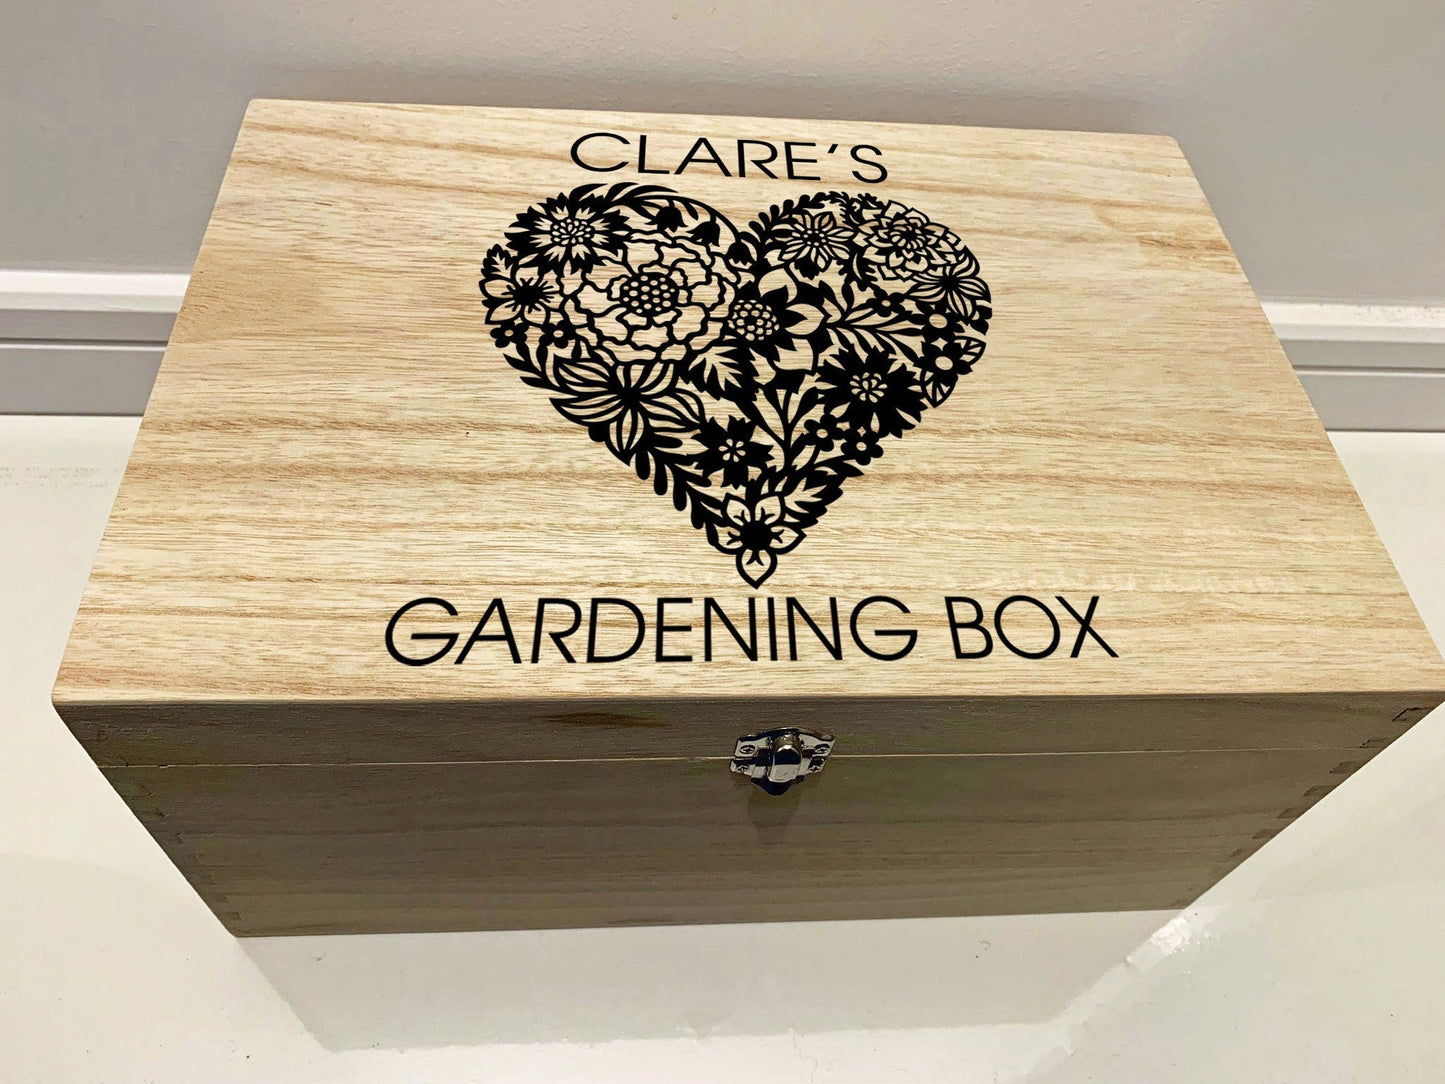 Large Personalised Engraved Wooden Floral Gardening Box with Flower Heart - Resplendent Aurora